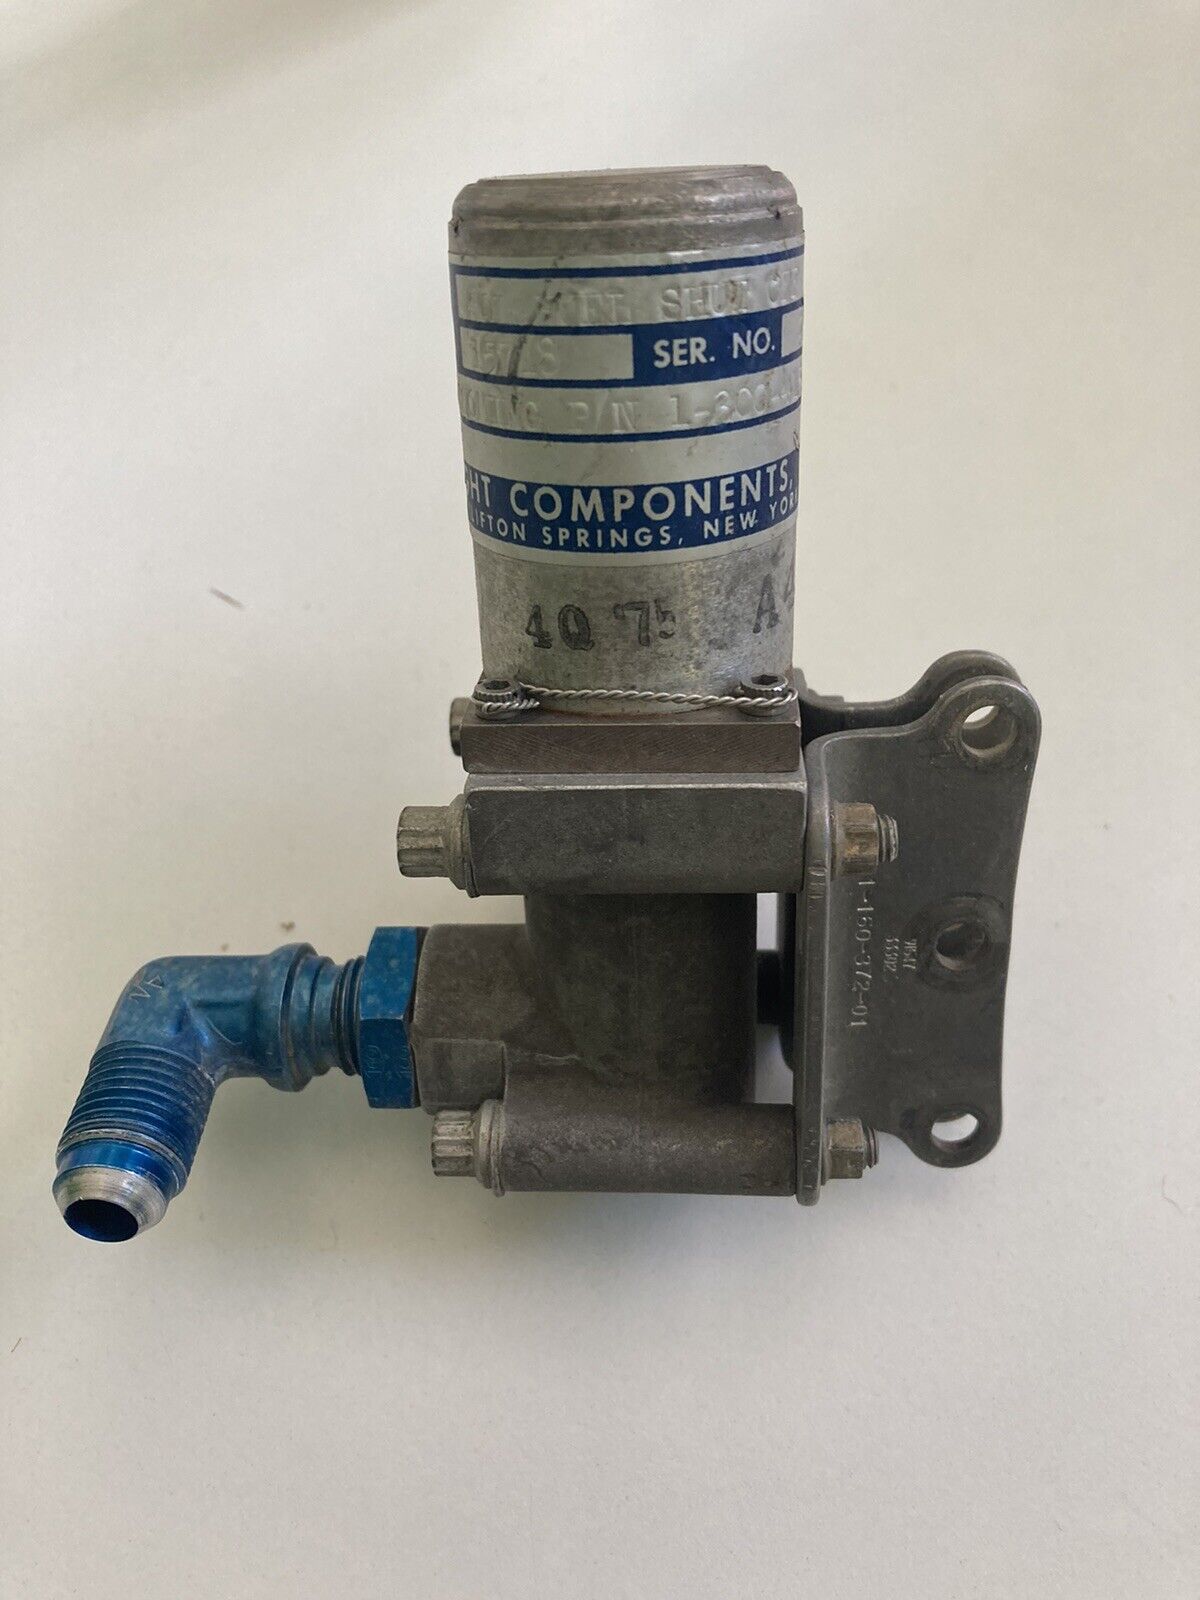 AVCO Lycoming 1-300-415 / Wright Components Fuel Shut Off Solenoid PN 15718